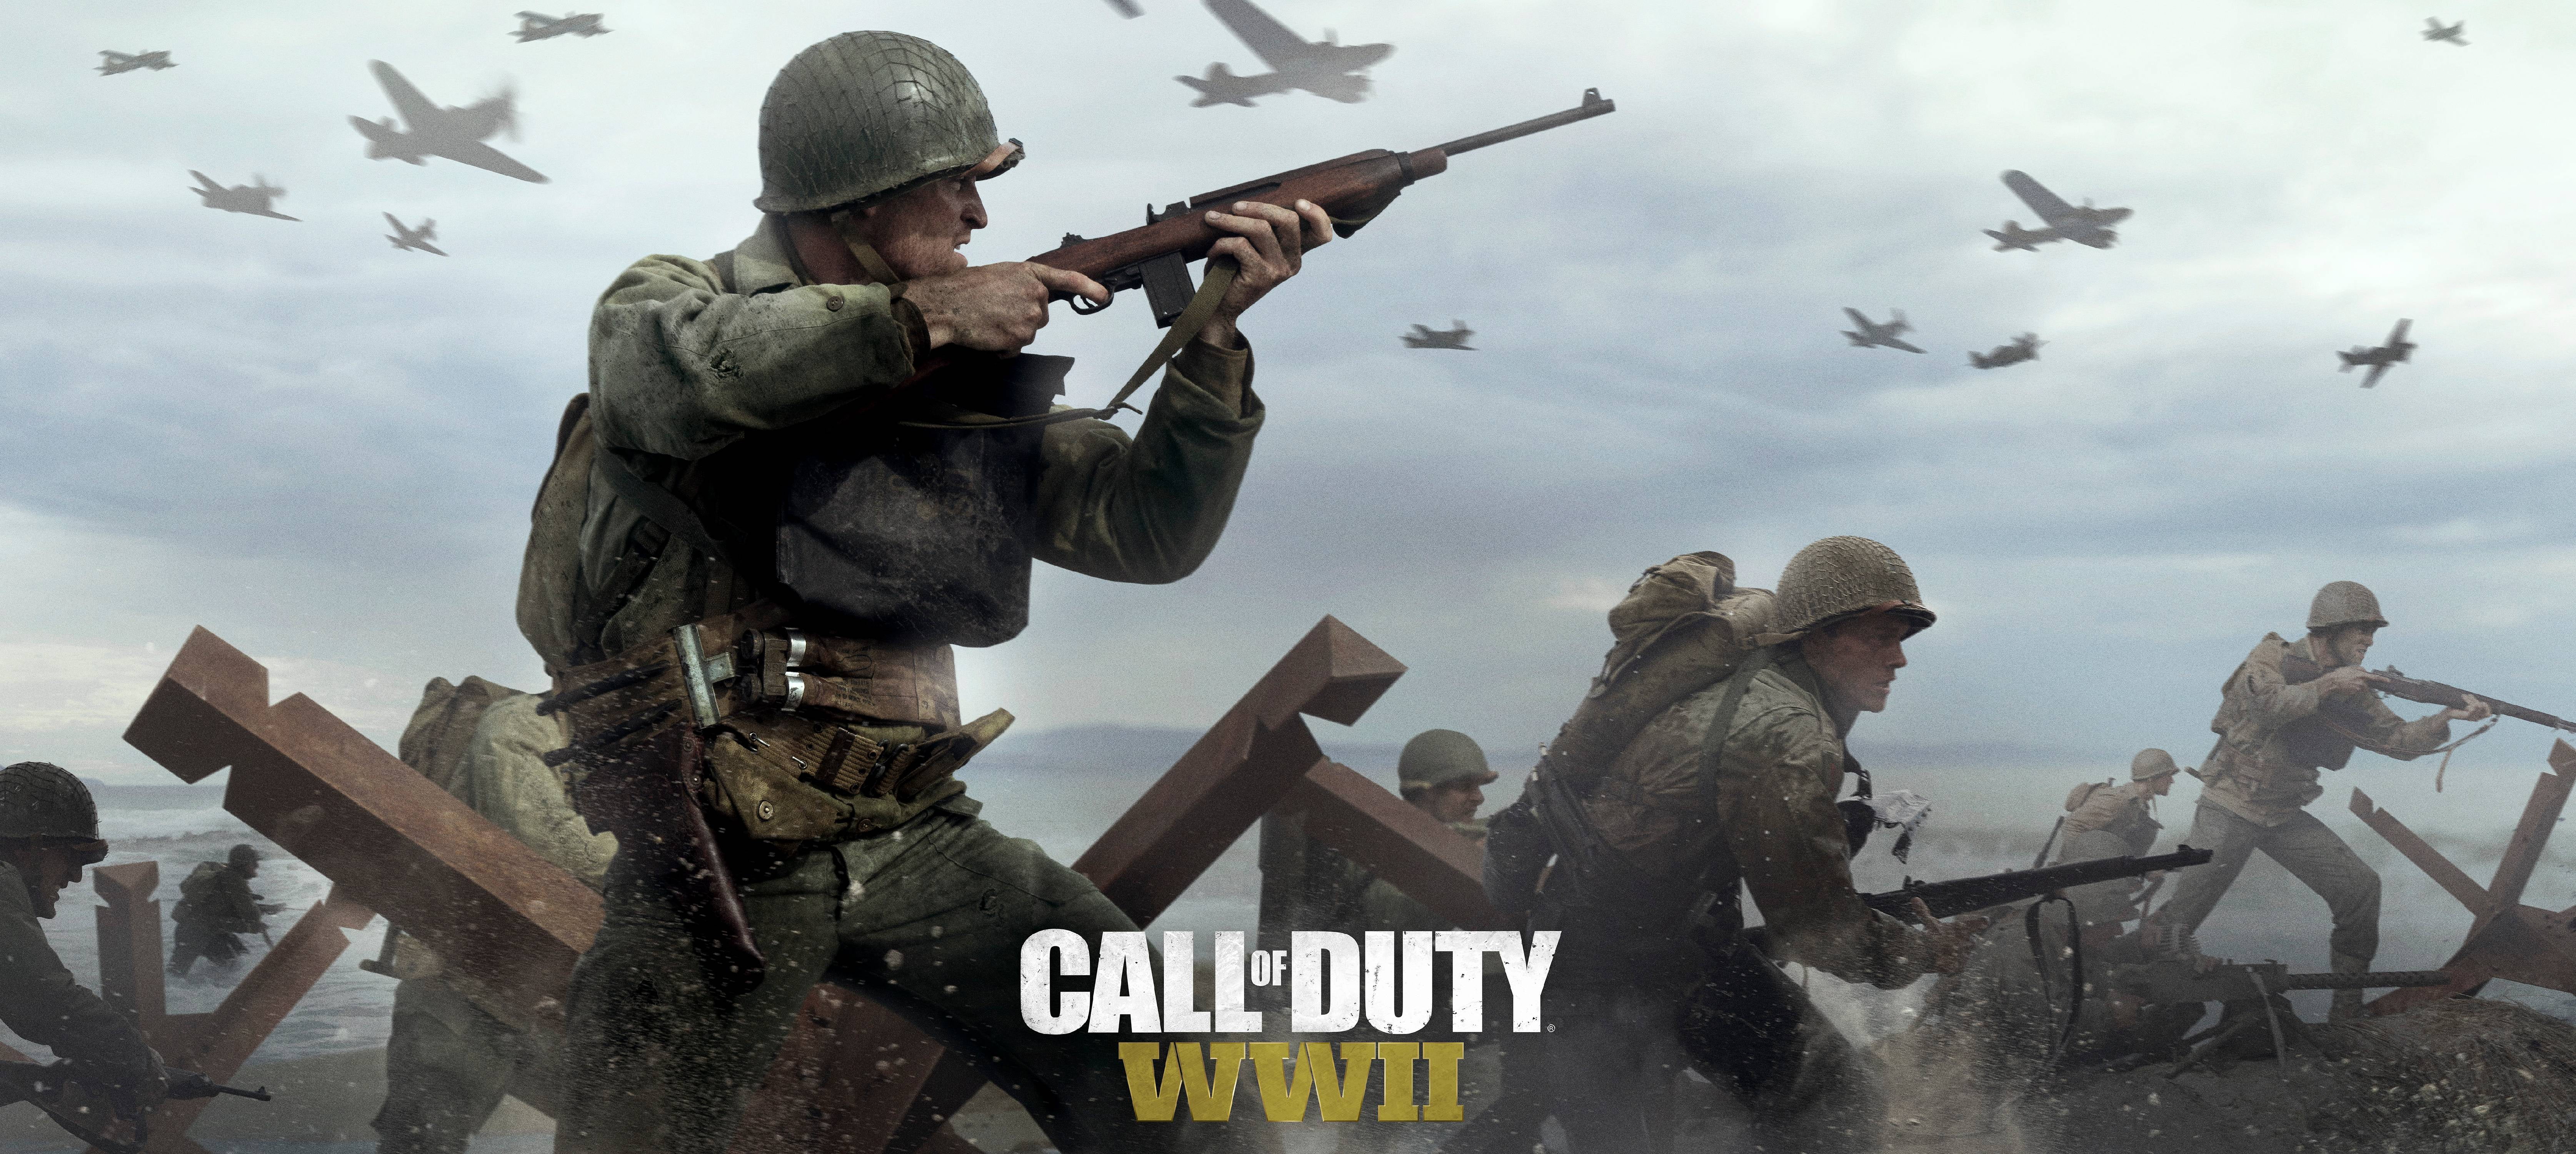 Call of Duty: WWII [Xbox One] — MyShopville